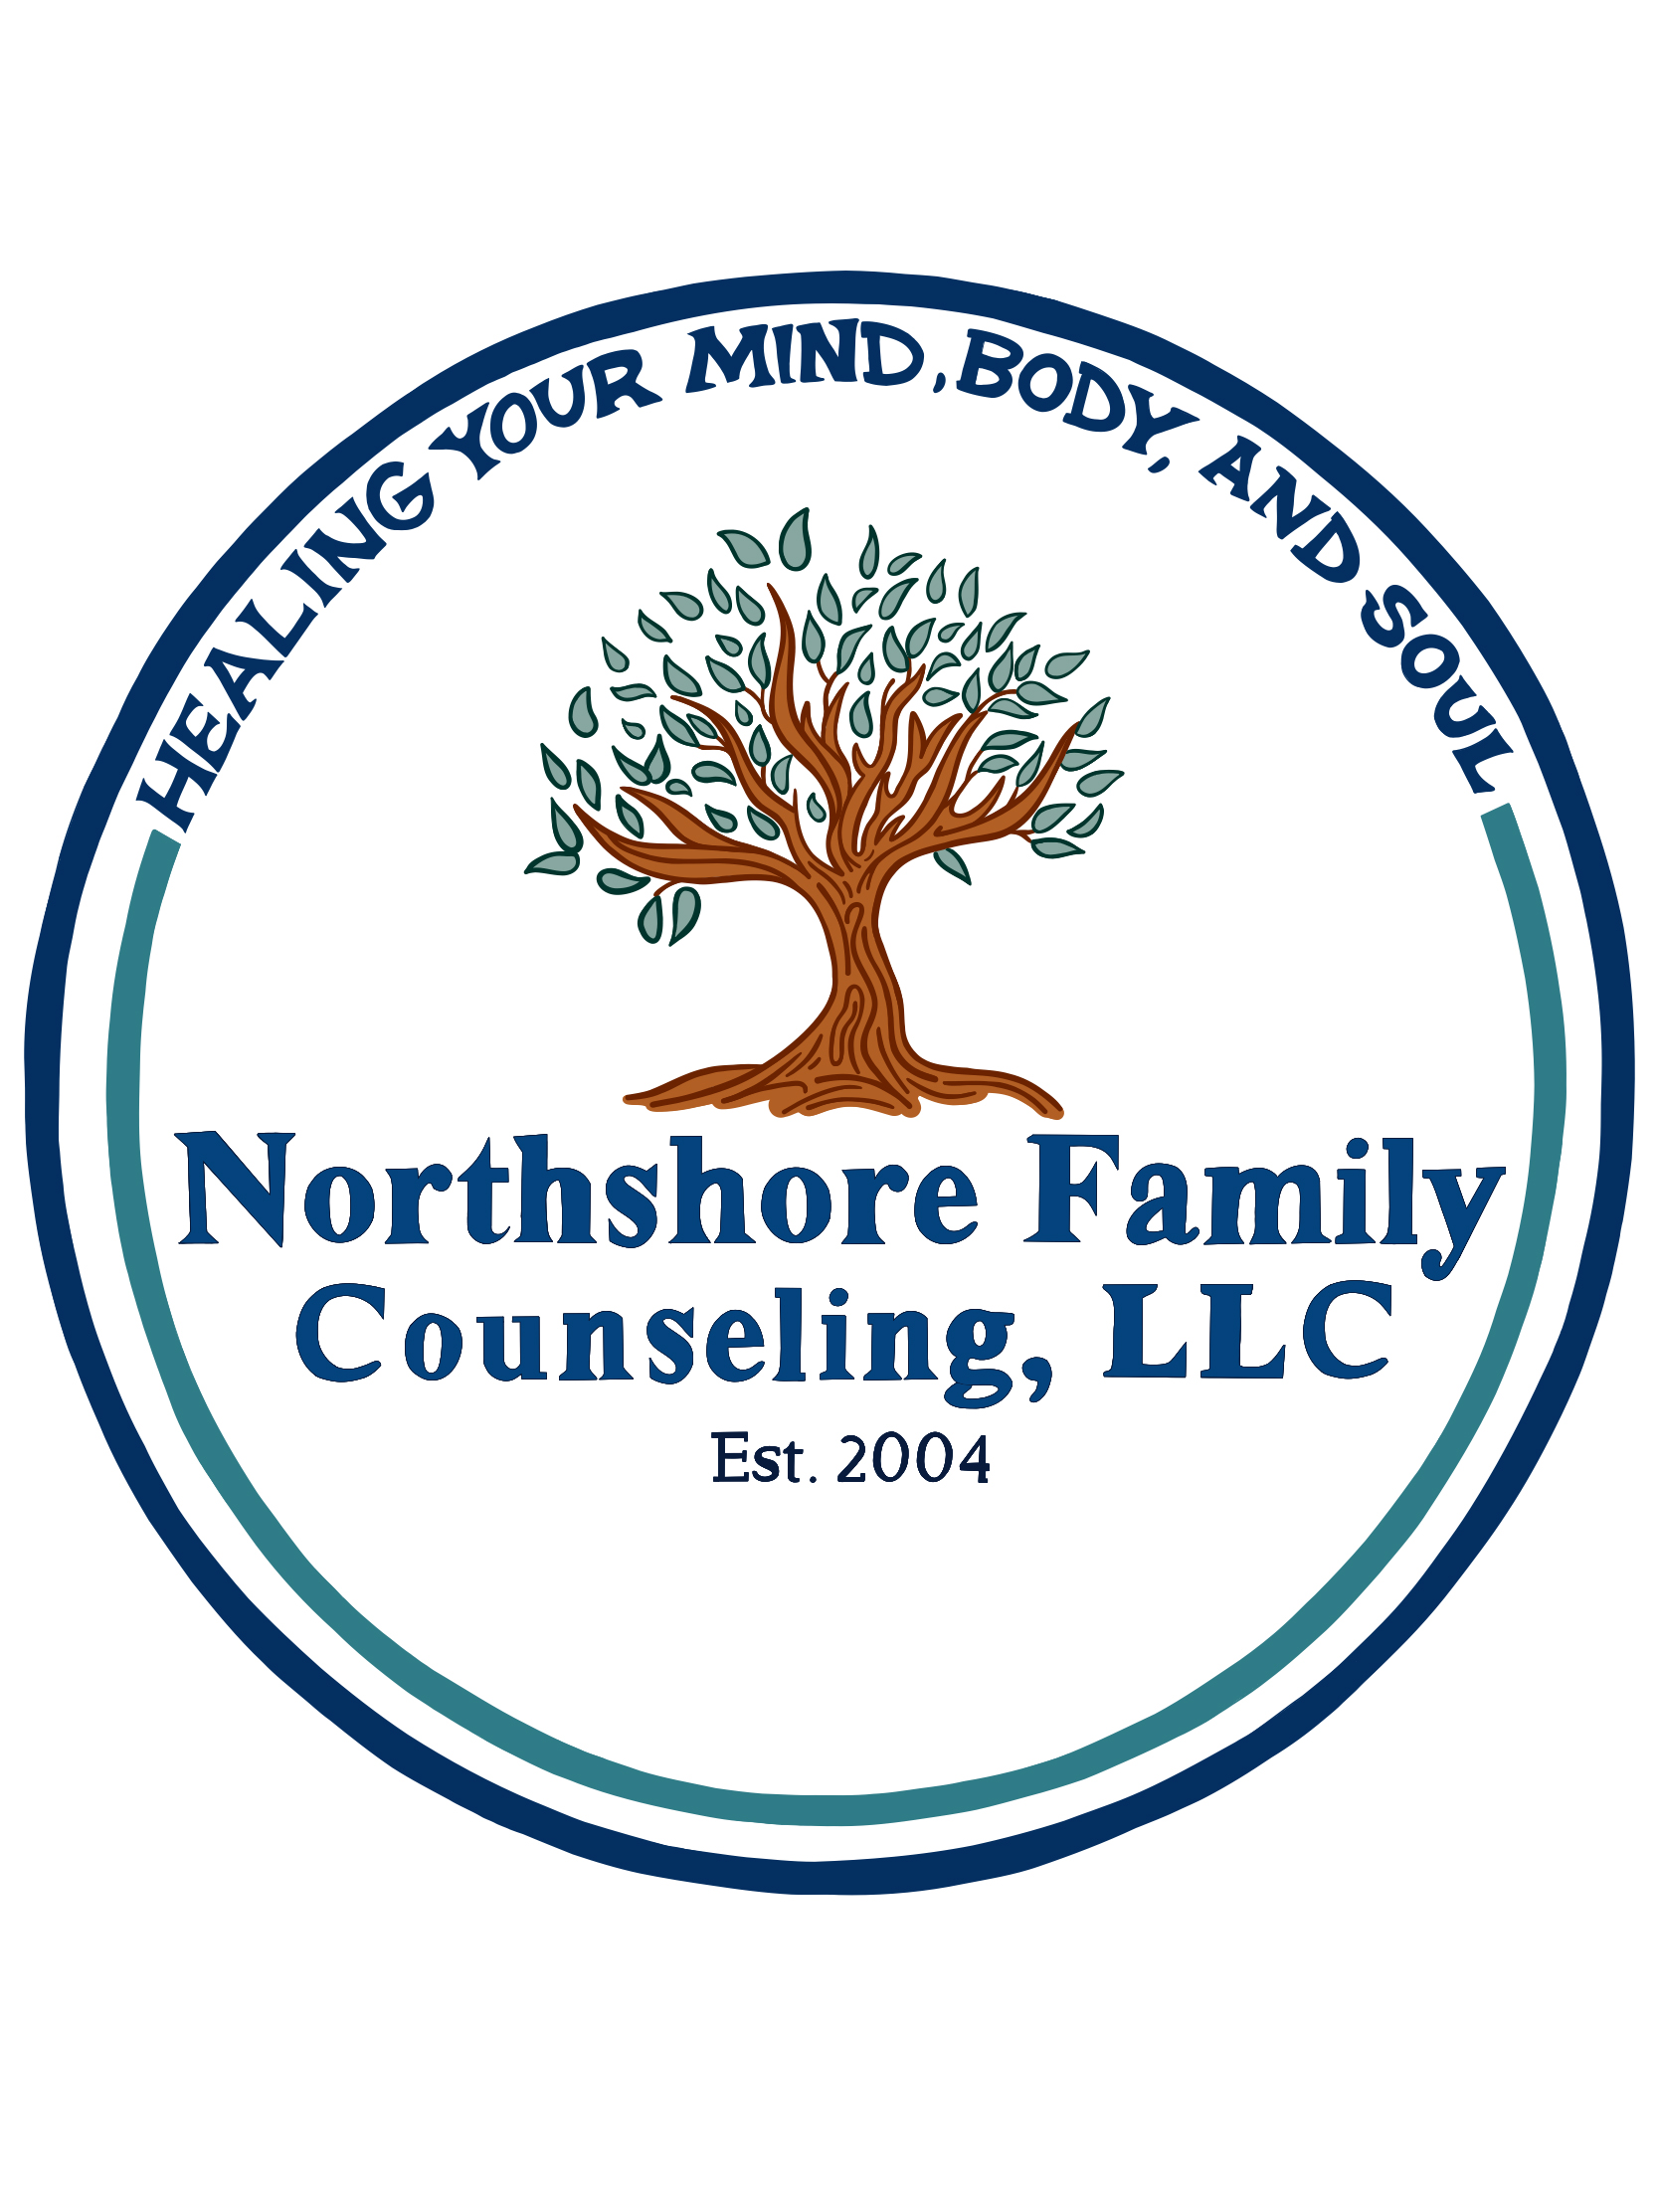 Northshore Family Counseling, LLC